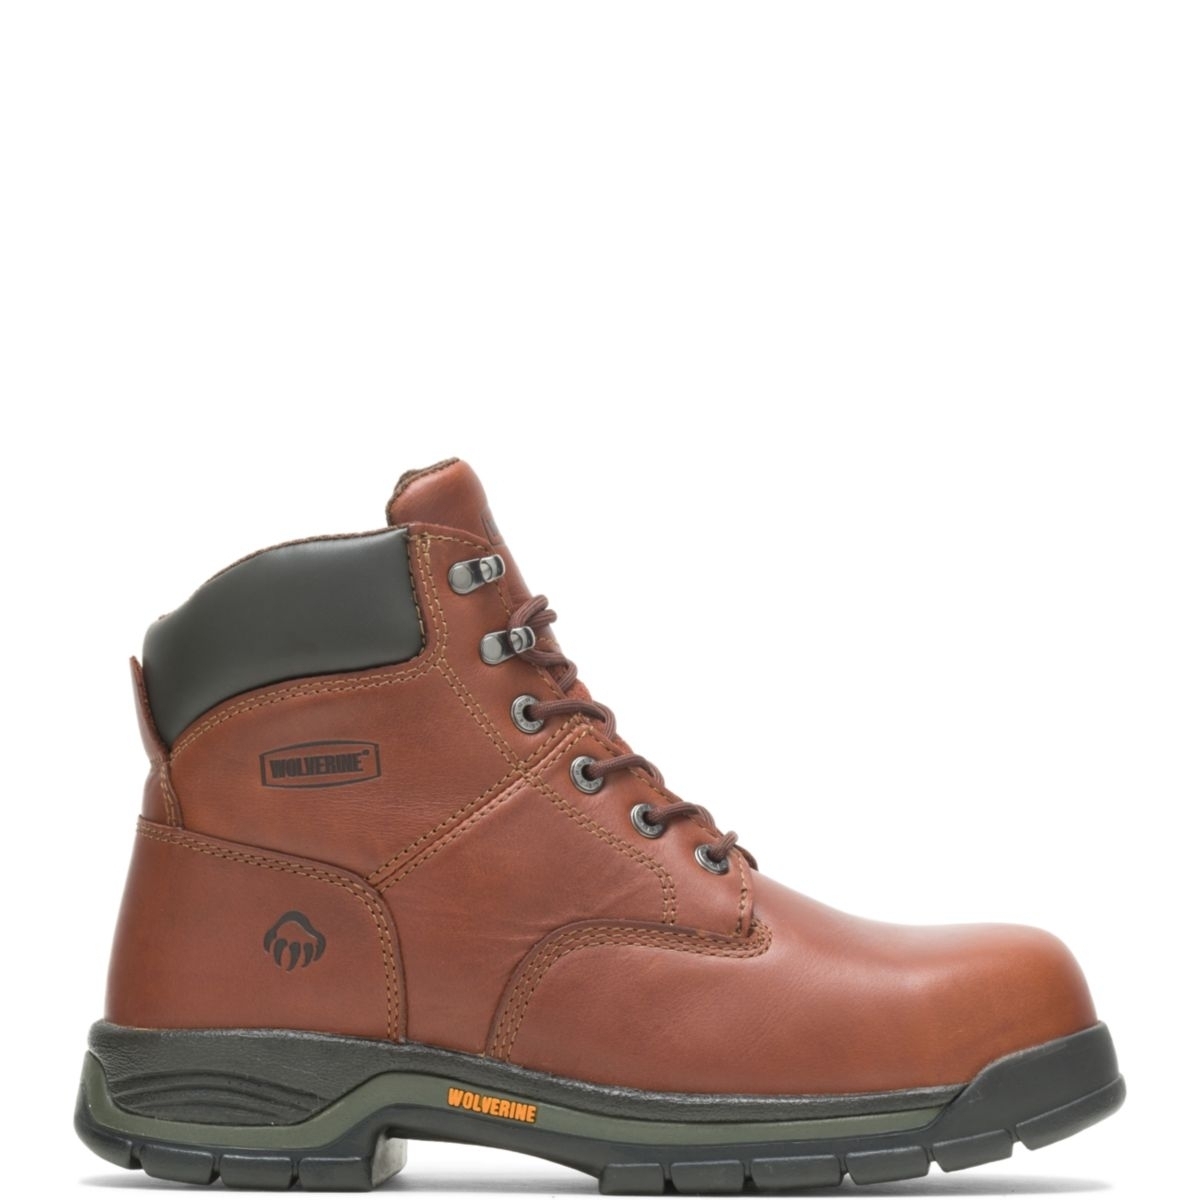 WOLVERINE Men's Harrison 6 Lace-Up SoftToe Work Boot Brown - W04906 Varies BROWN - BROWN, 8